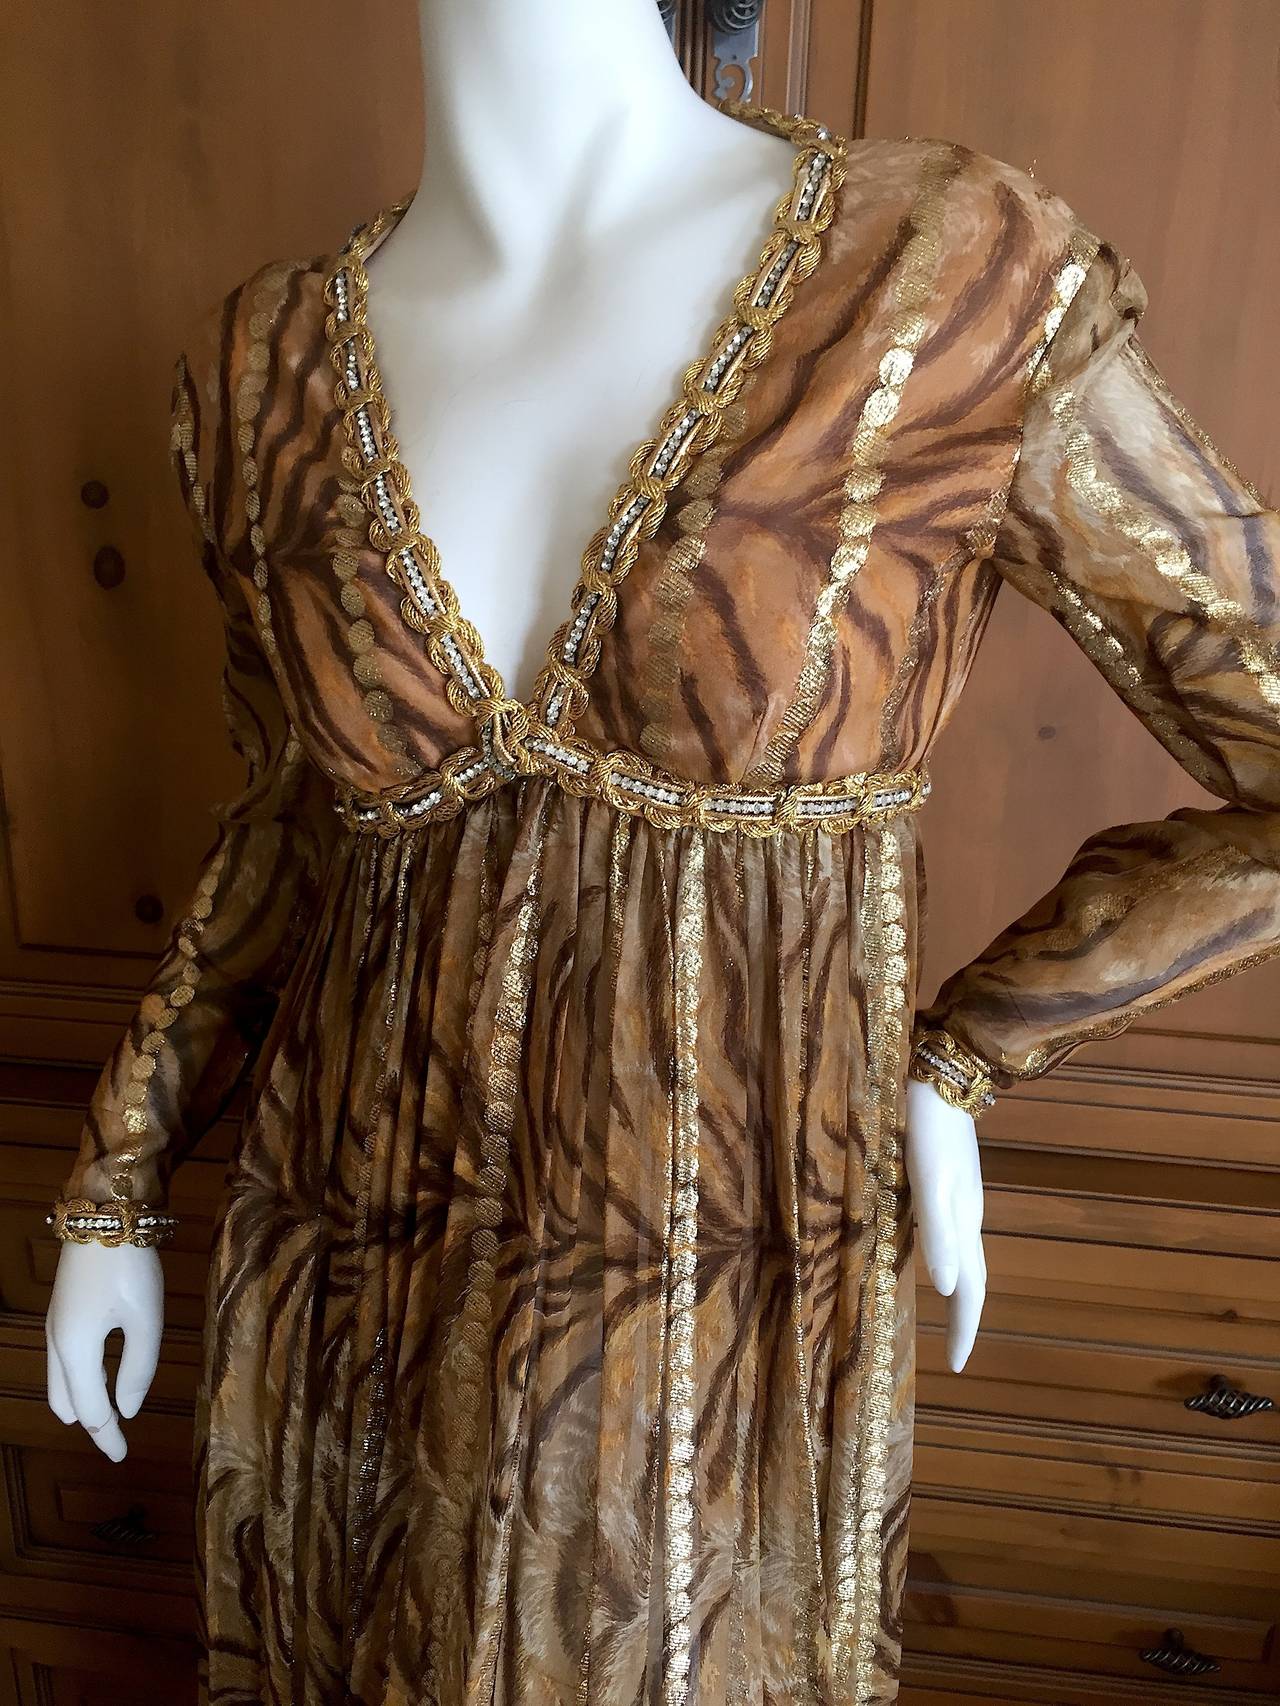 Bill Blass Seductive Vintage Empire Jeweled Silk Dress .
Stunning silk chiffon tiger print with gold accents, with Swarovski crystal and god wire work details.
Empire waist with a low cut bust trimmed in gold an crystal.
Measurements to follow